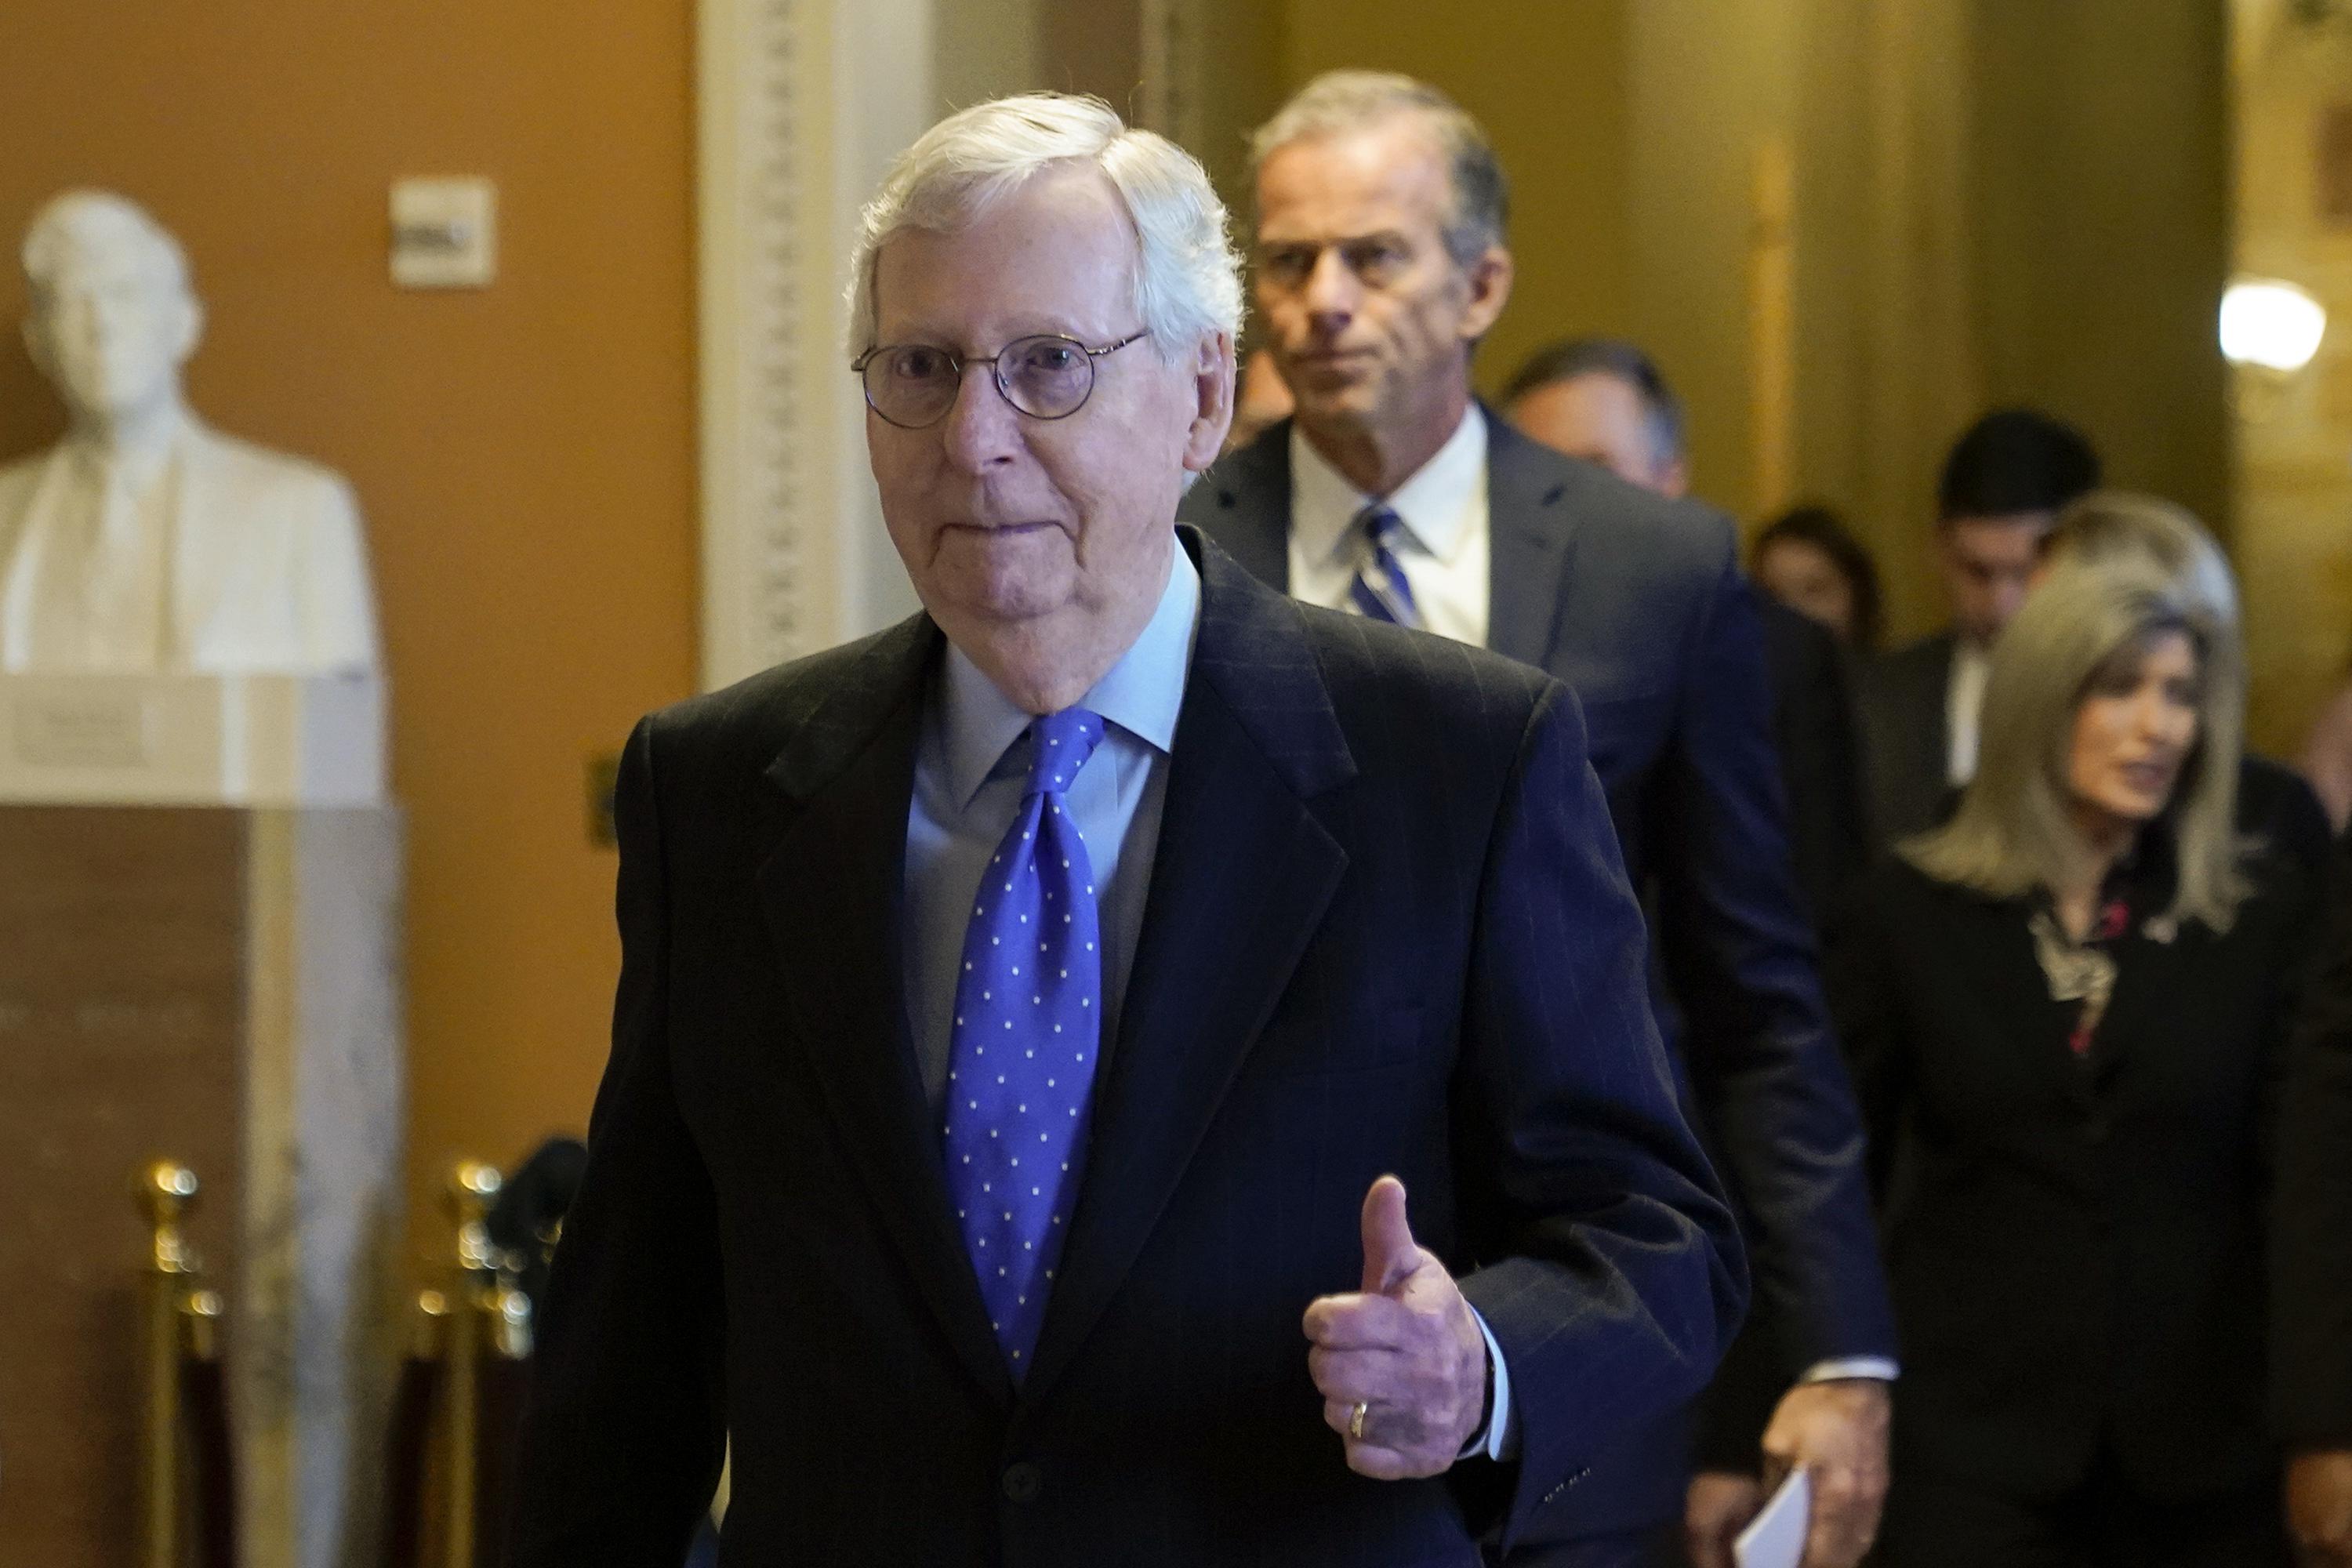 McConnell reelected Senate GOP leader: ‘Not going anywhere’